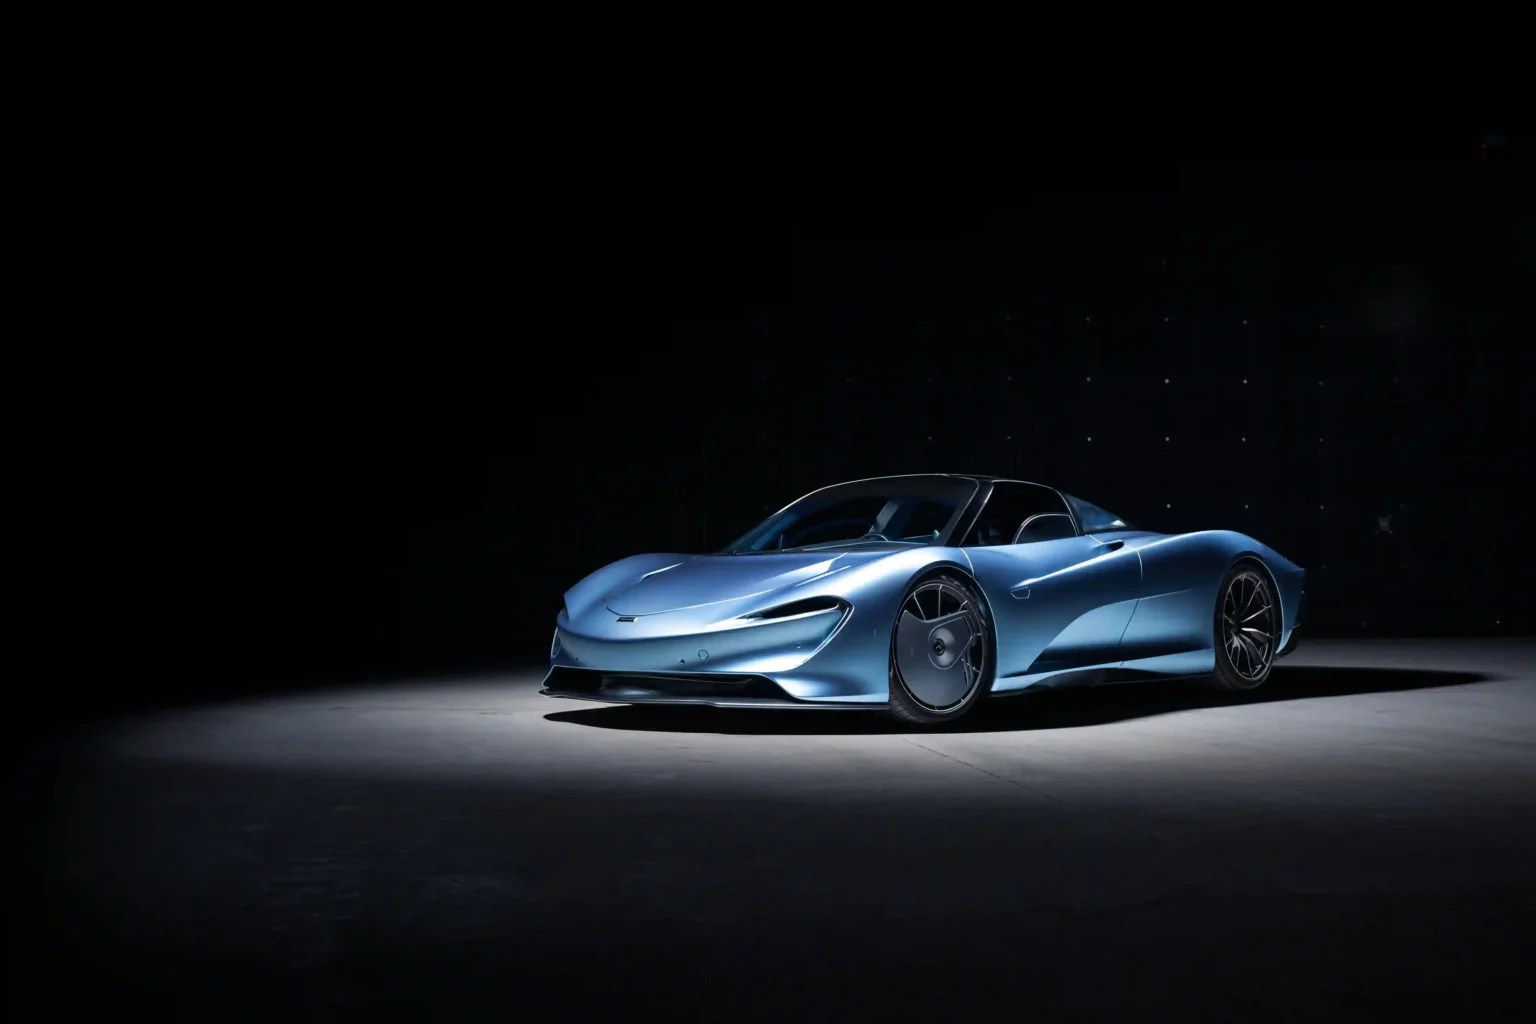 The rare 2020 McLaren Speedtail supercar selling for £2million at an auction in Phoenix, Arizona, US.